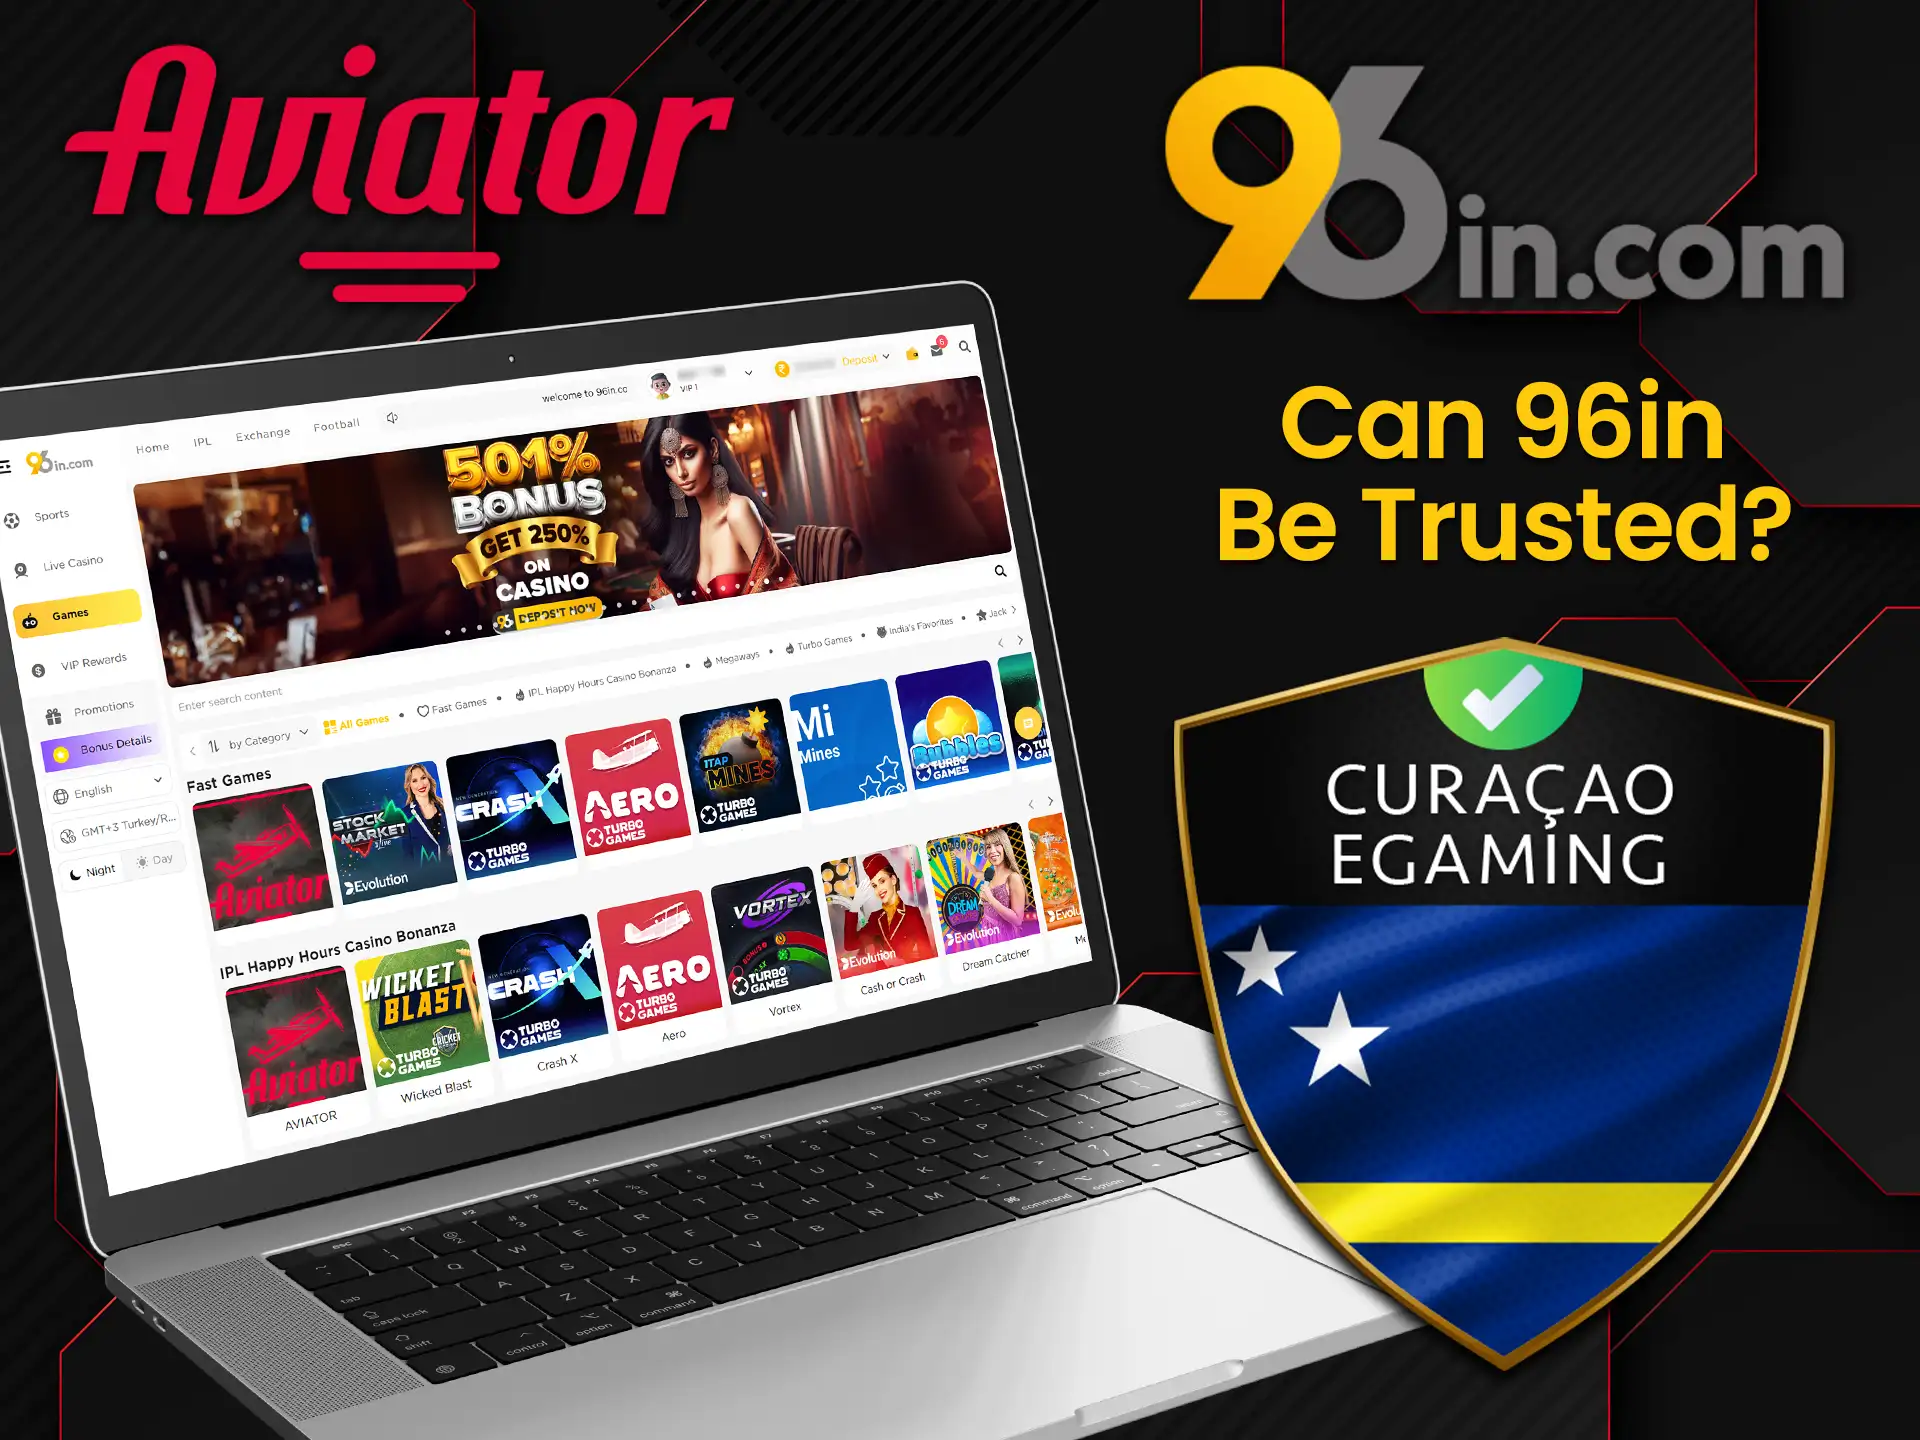 96in provides gambling services legally and is licensed by Curacao.